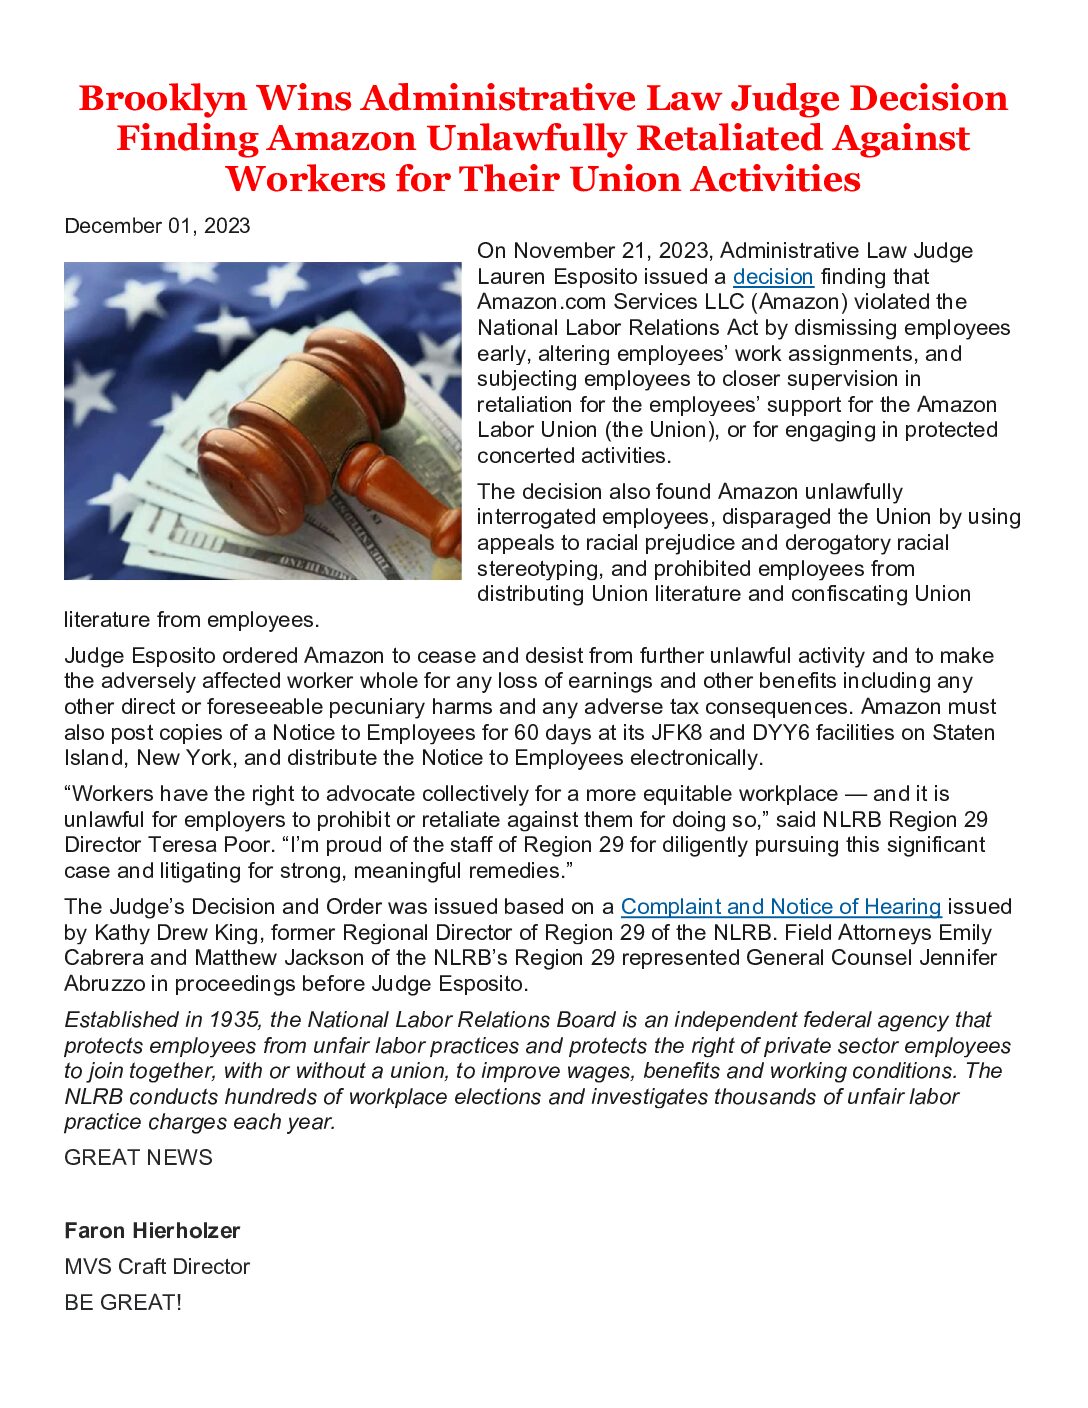 Judge Decision-Amazon Retaliated Against Workers for Their Union Activities - 